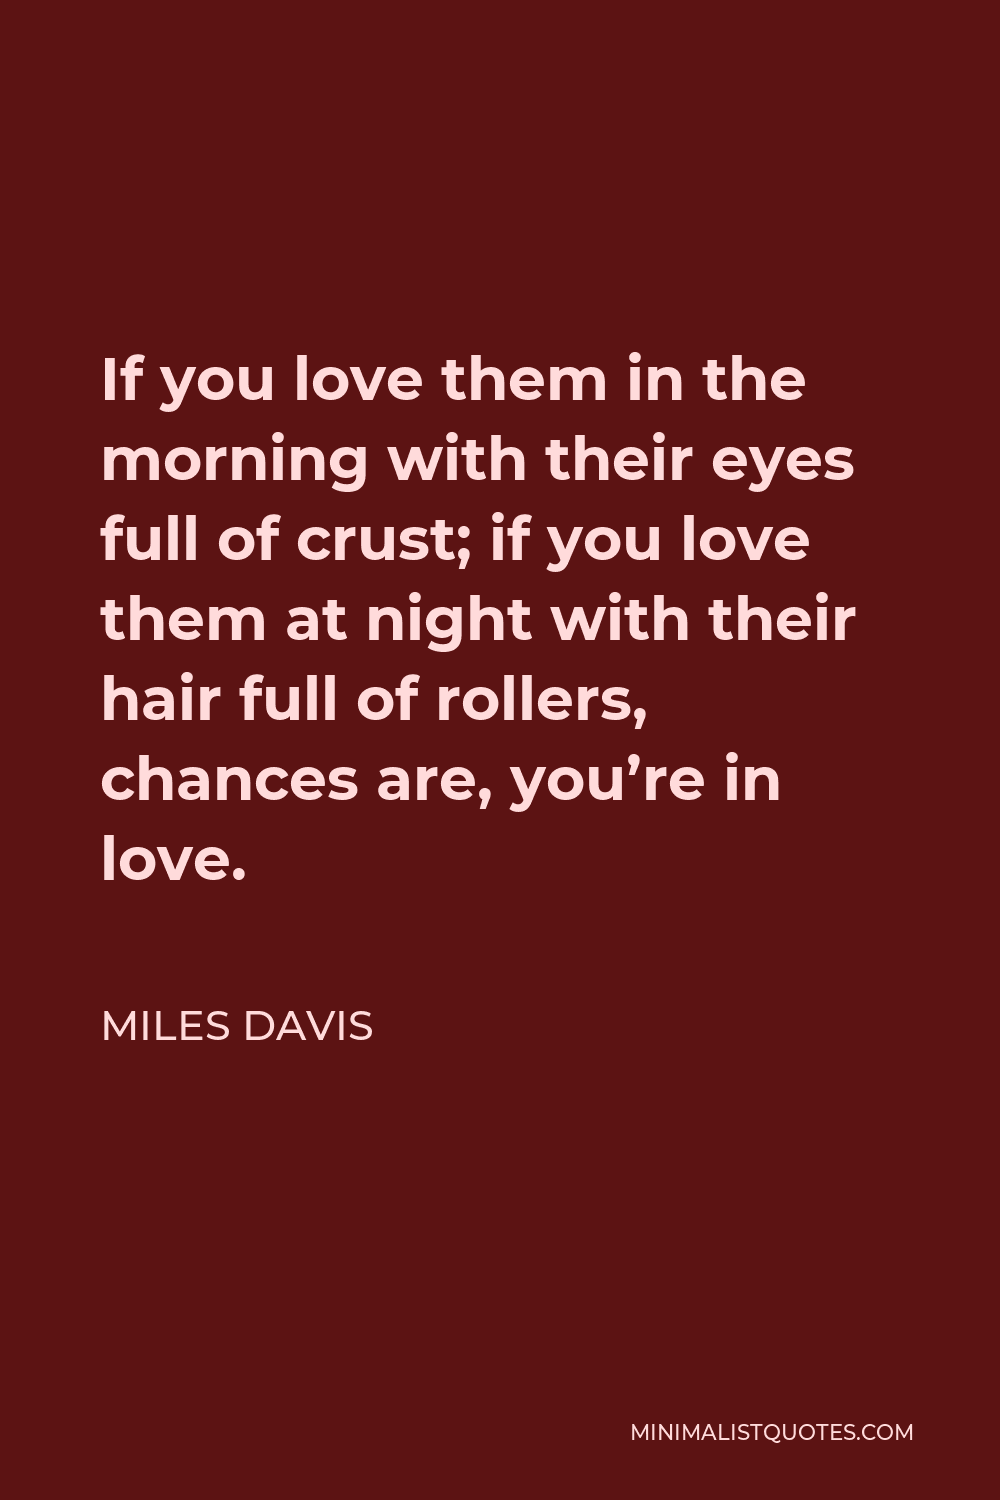 Miles Davis Quote - If you love them in the morning with their eyes full of crust; if you love them at night with their hair full of rollers, chances are, you’re in love.